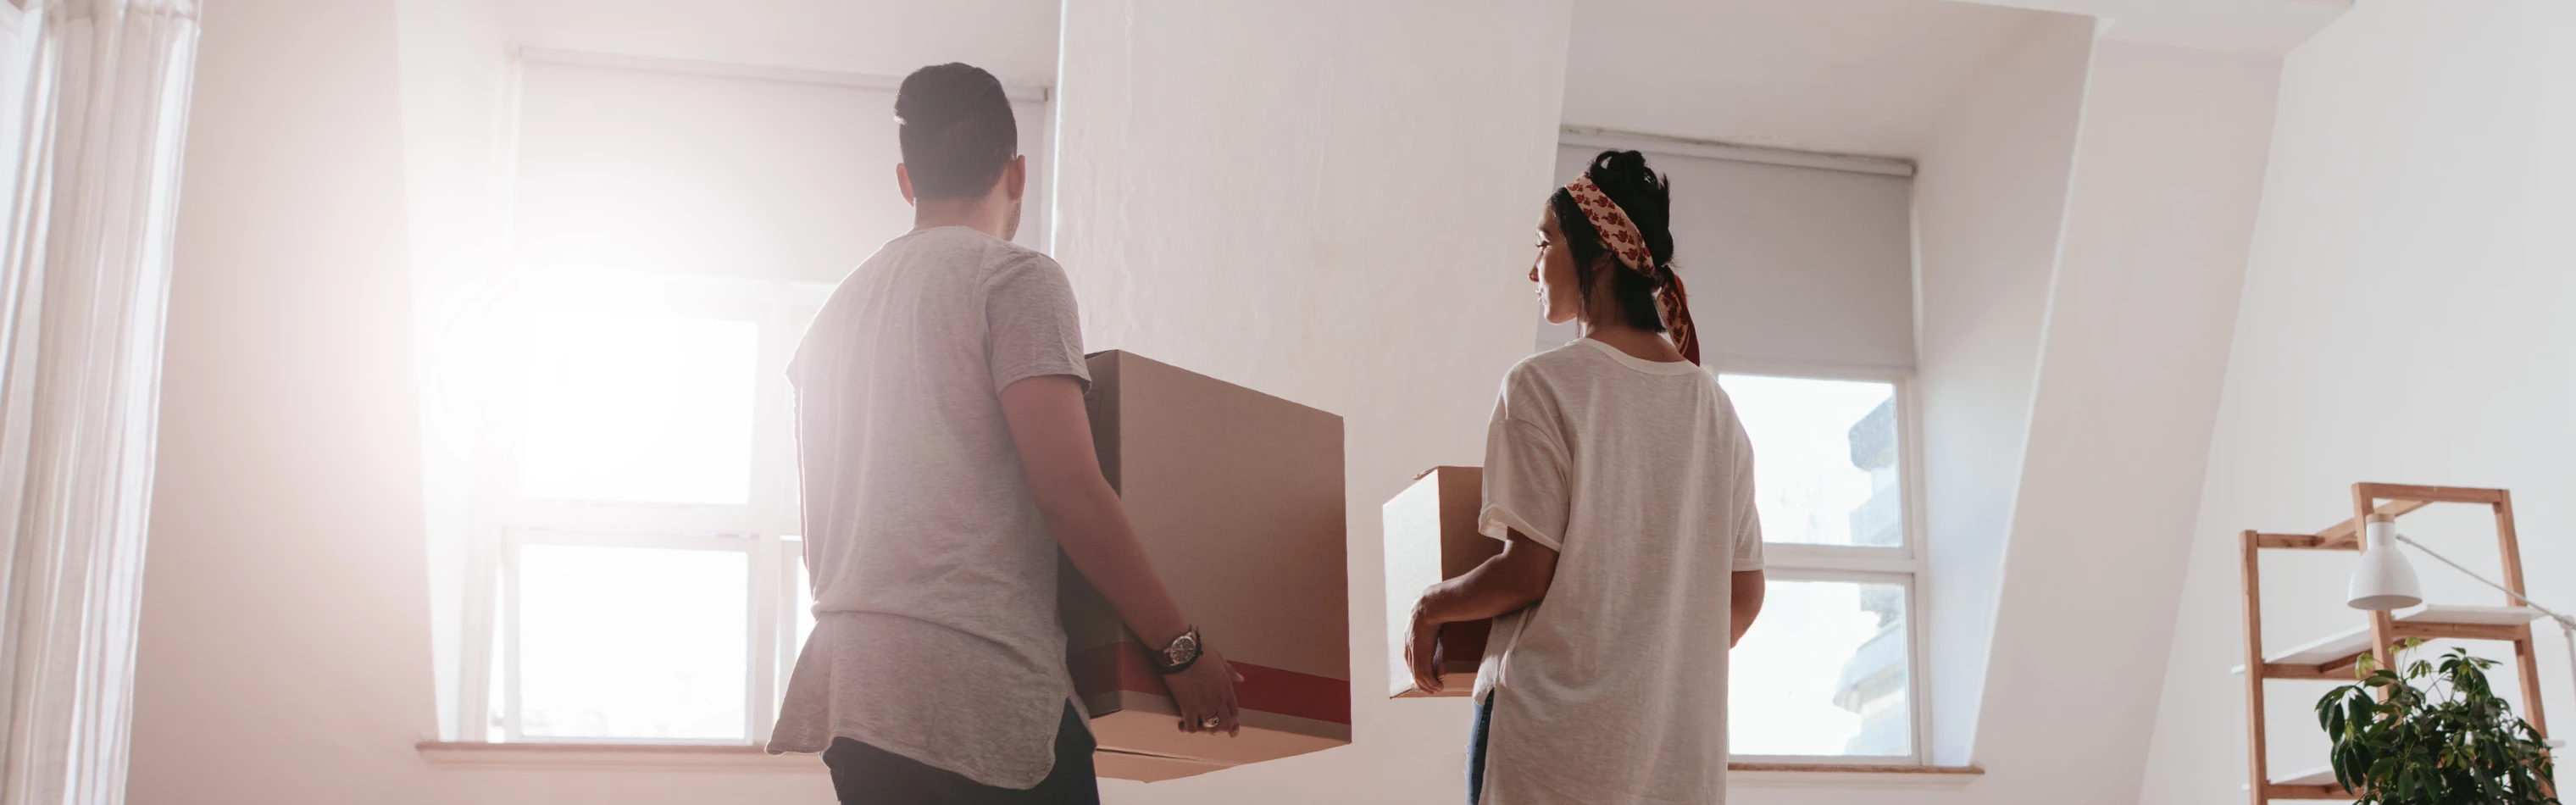 Man and woman moving boxes in brightly lit interior.